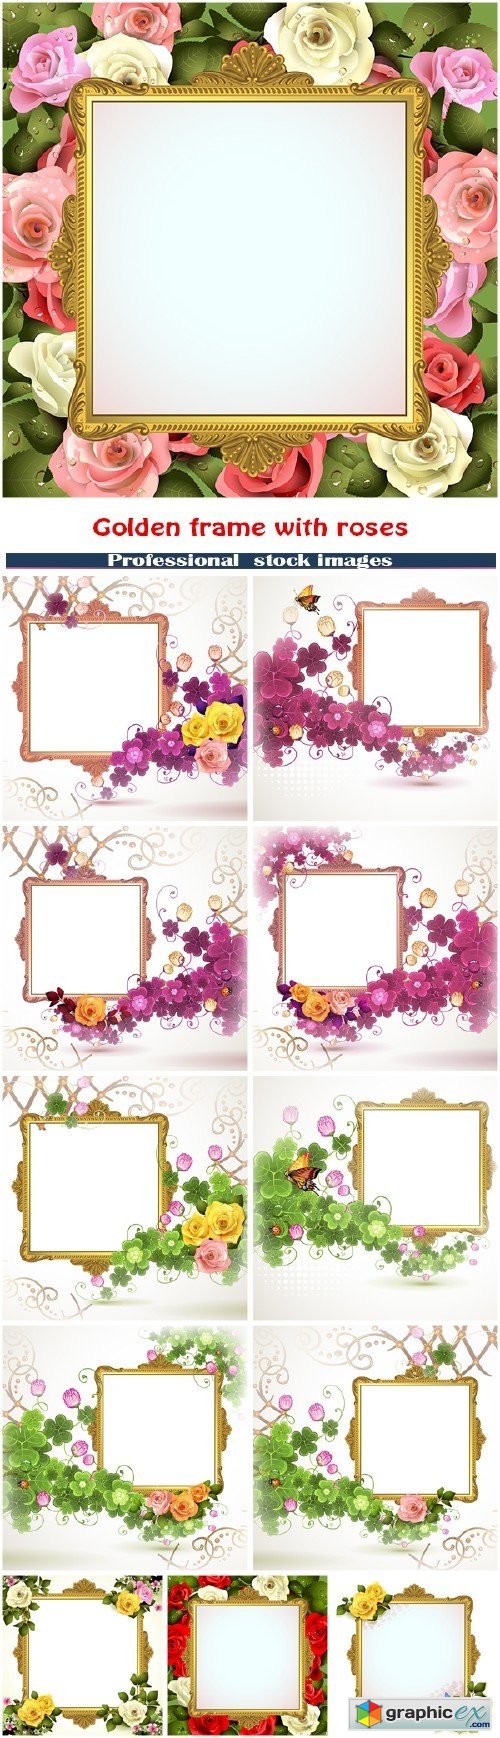 Golden frame with roses